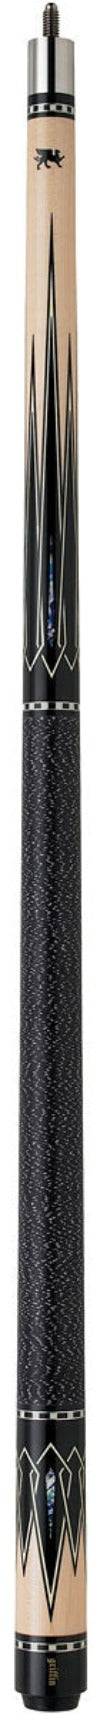 Griffin GR26 Pool Cue -Griffin